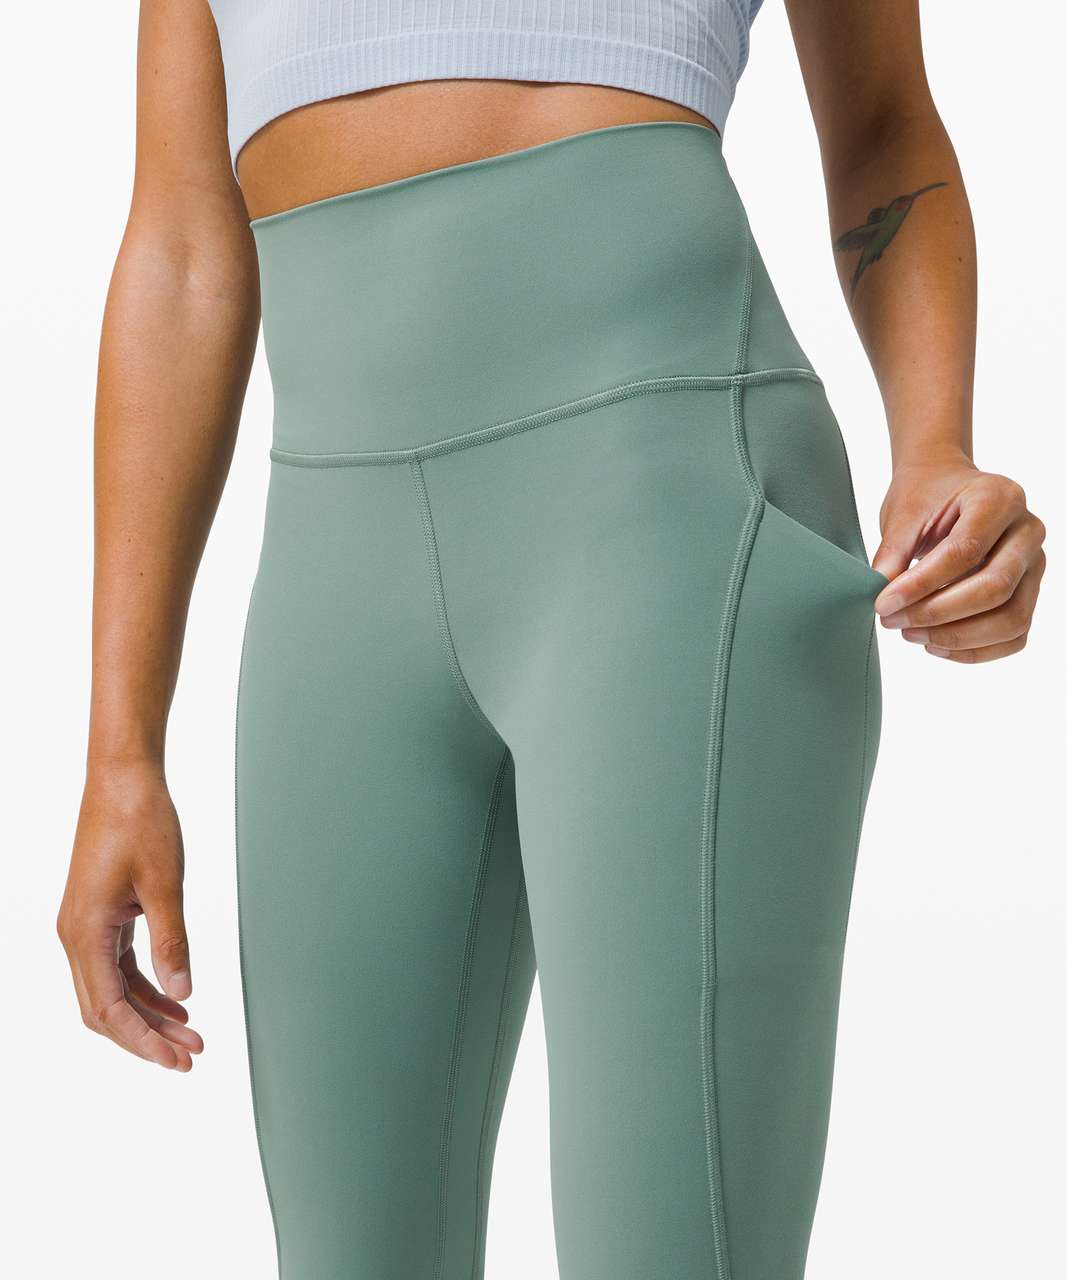 Lululemon Align High Rise Pant with Pockets 25" - Tidewater Teal